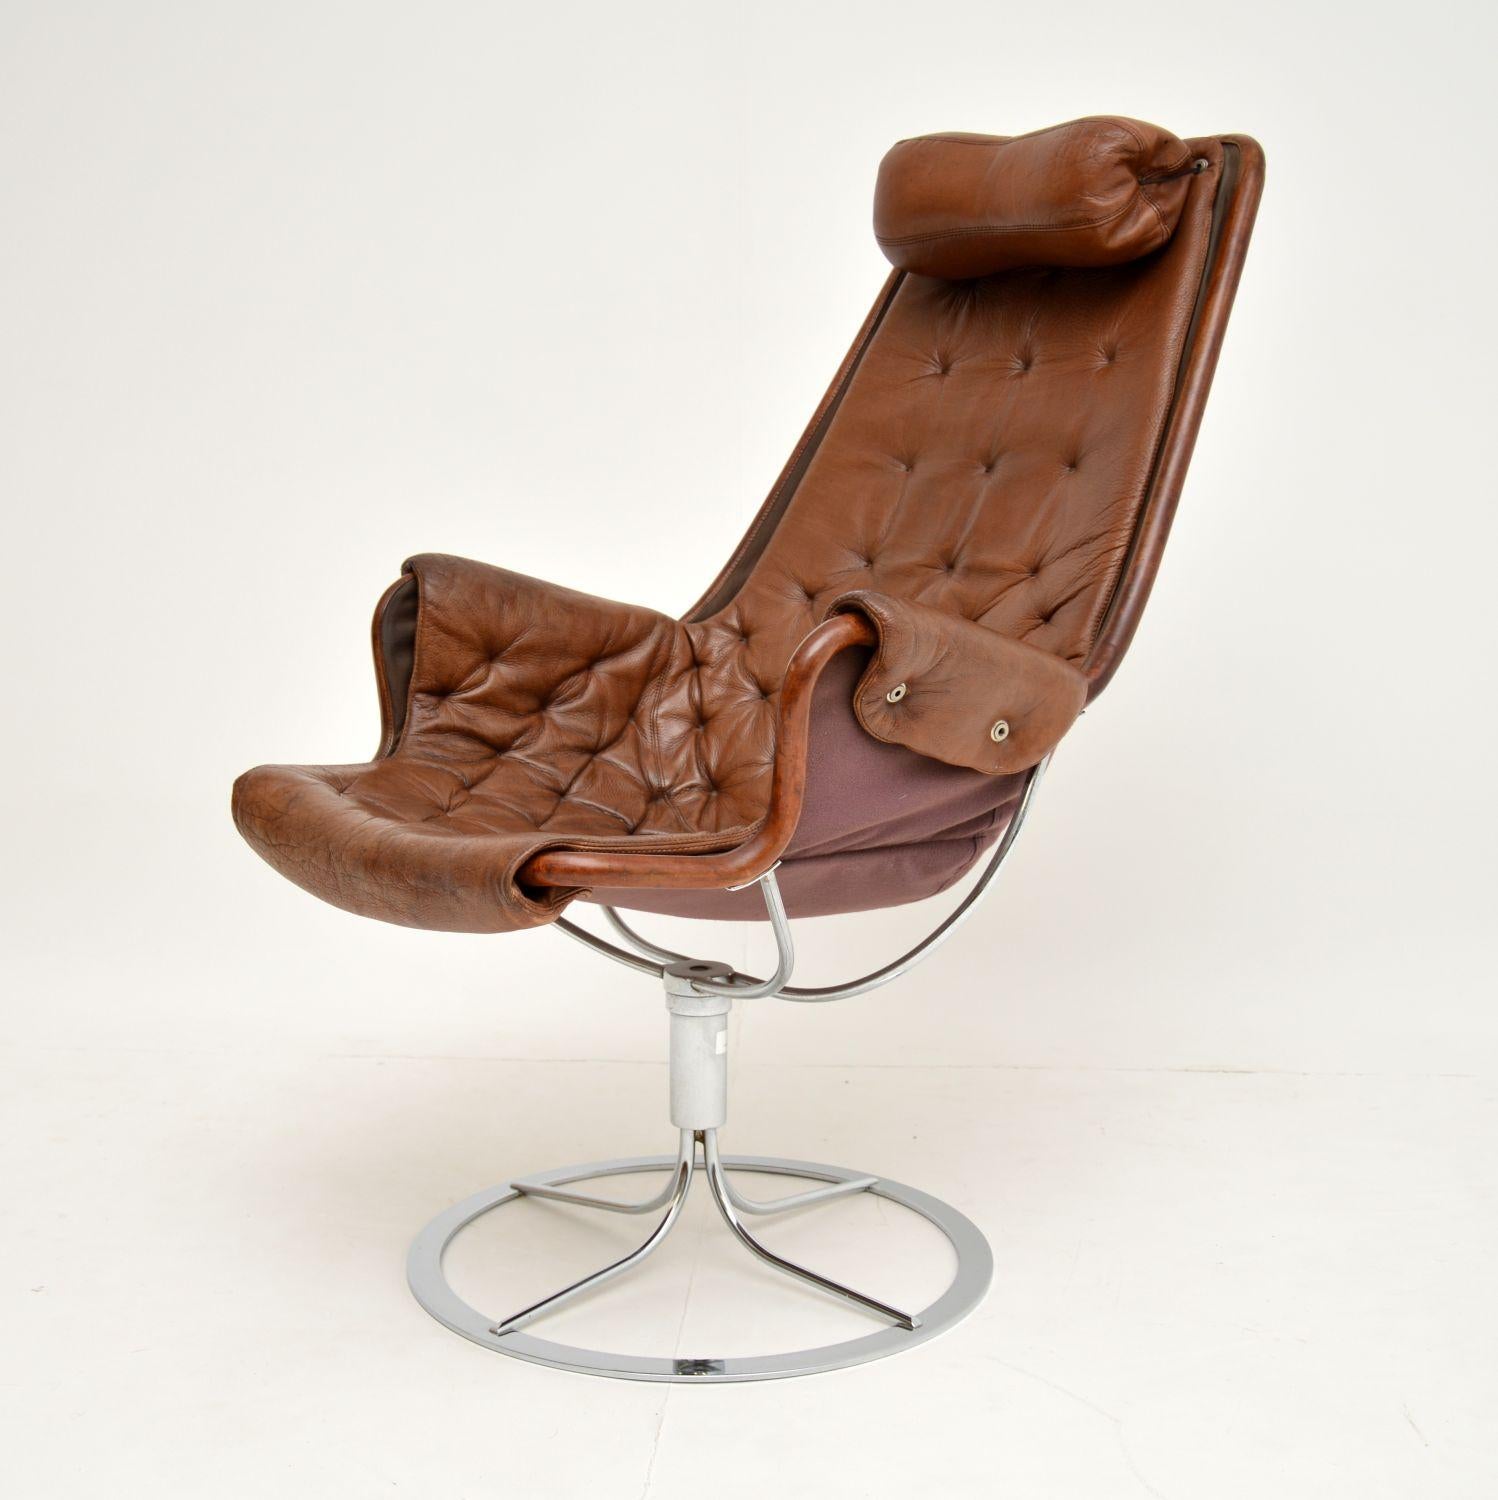 A stunning and iconic design, this is the Jetson chair, designed by Bruno Mathsson. They were made in Sweden by DUX, this one dates from the 1960s-1970s. The quality is amazing, it has a gorgeous look with the leather seat contrasting nicely with